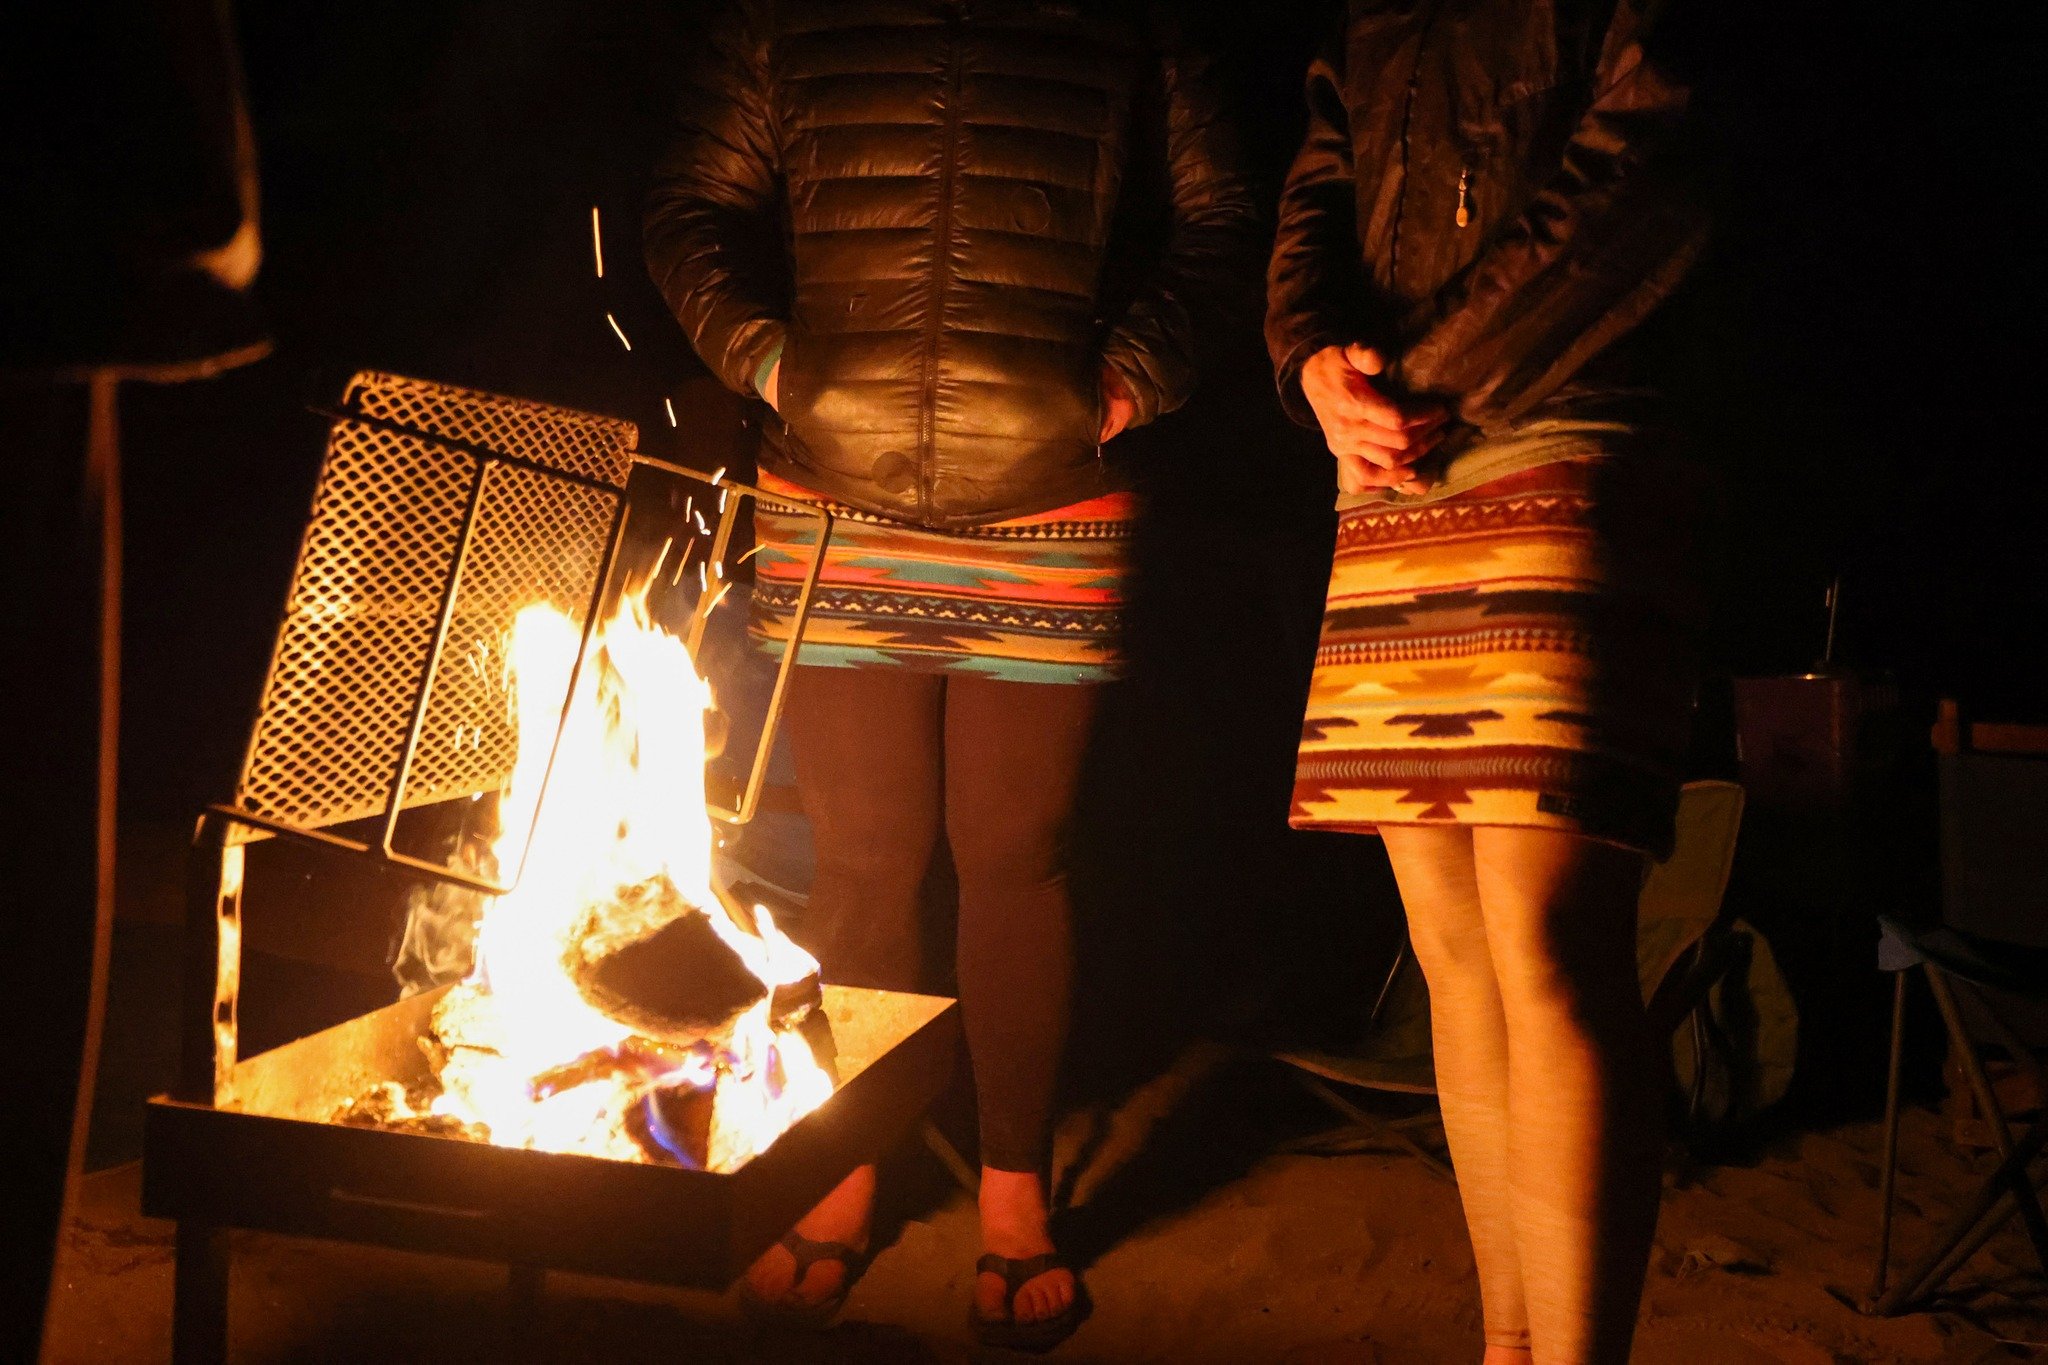 Cozy at the Campfire with FunLuvin' Fleece

Don't forget! Our entire website is on sale!  Enter code LOVEYOURMOMMA at checkout for 20% off your order!

PC @samantha_sais_photography 

#funluvin #funluvinfleecewear #funluvinfleece #funluvinskirt #skir